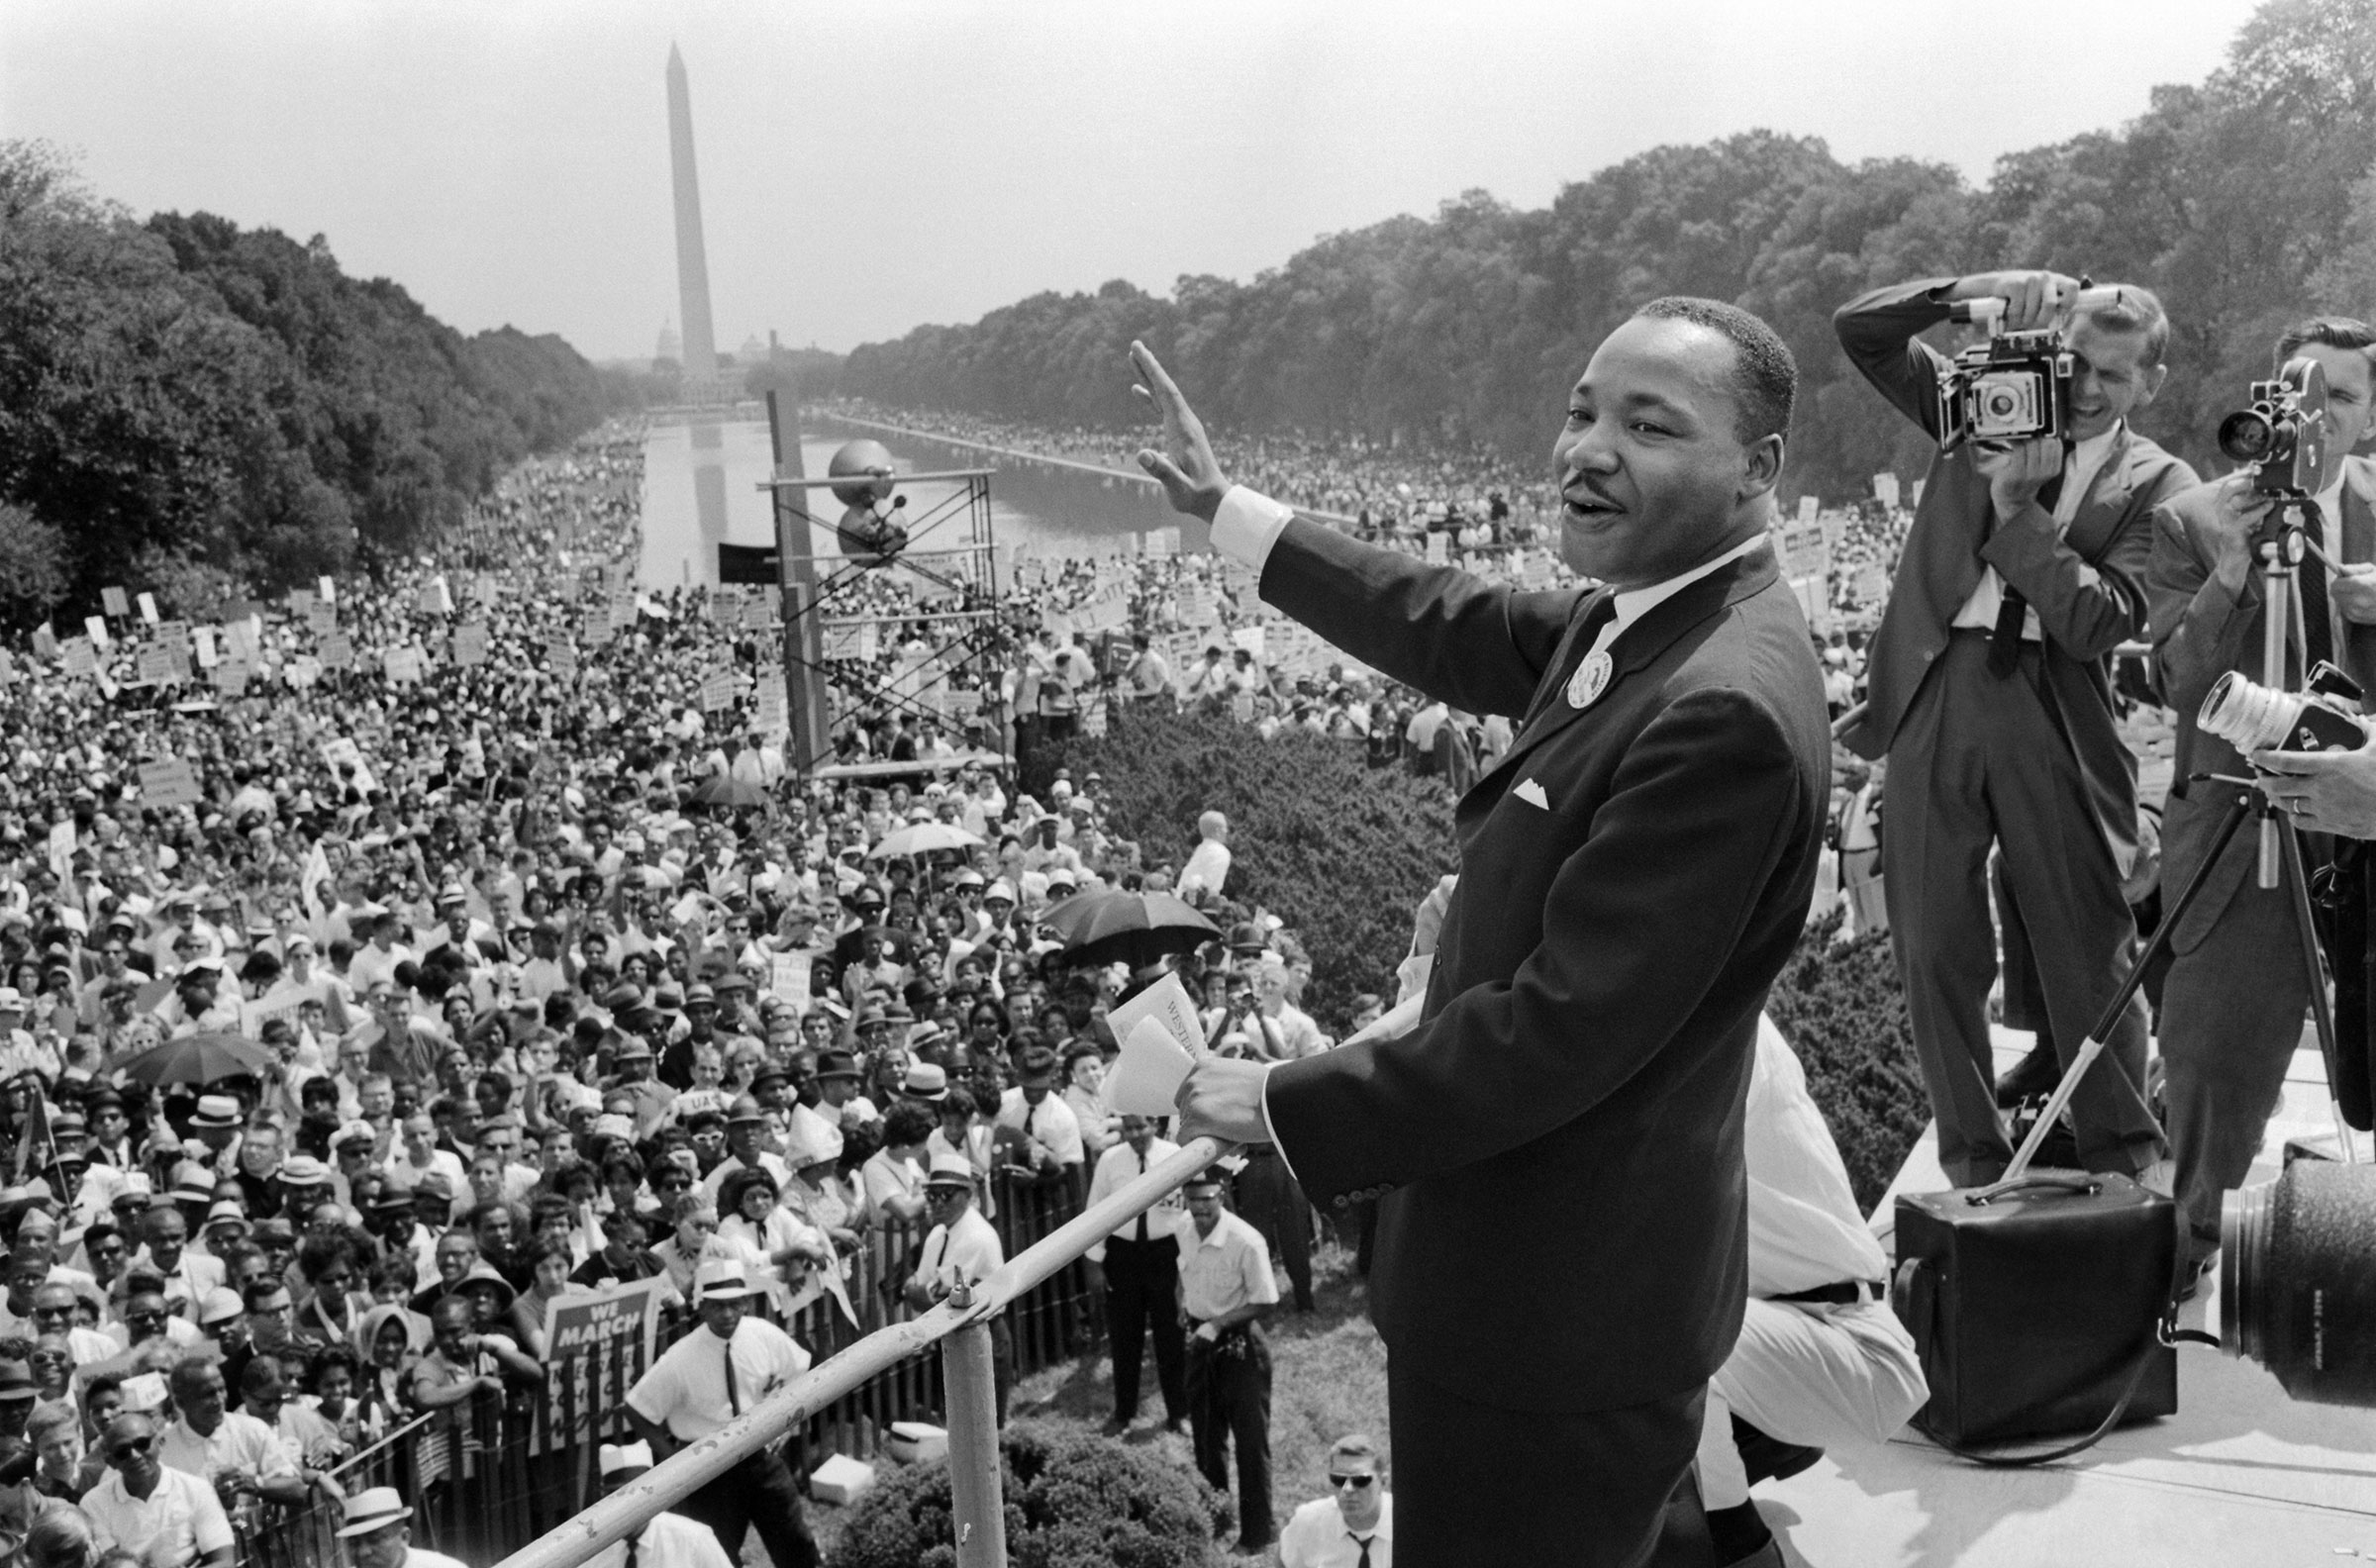 Dr. Martin Luther King, Jr. waves to supporters during the March on Washington on August 28, 1963. (AFP/Getty Images)